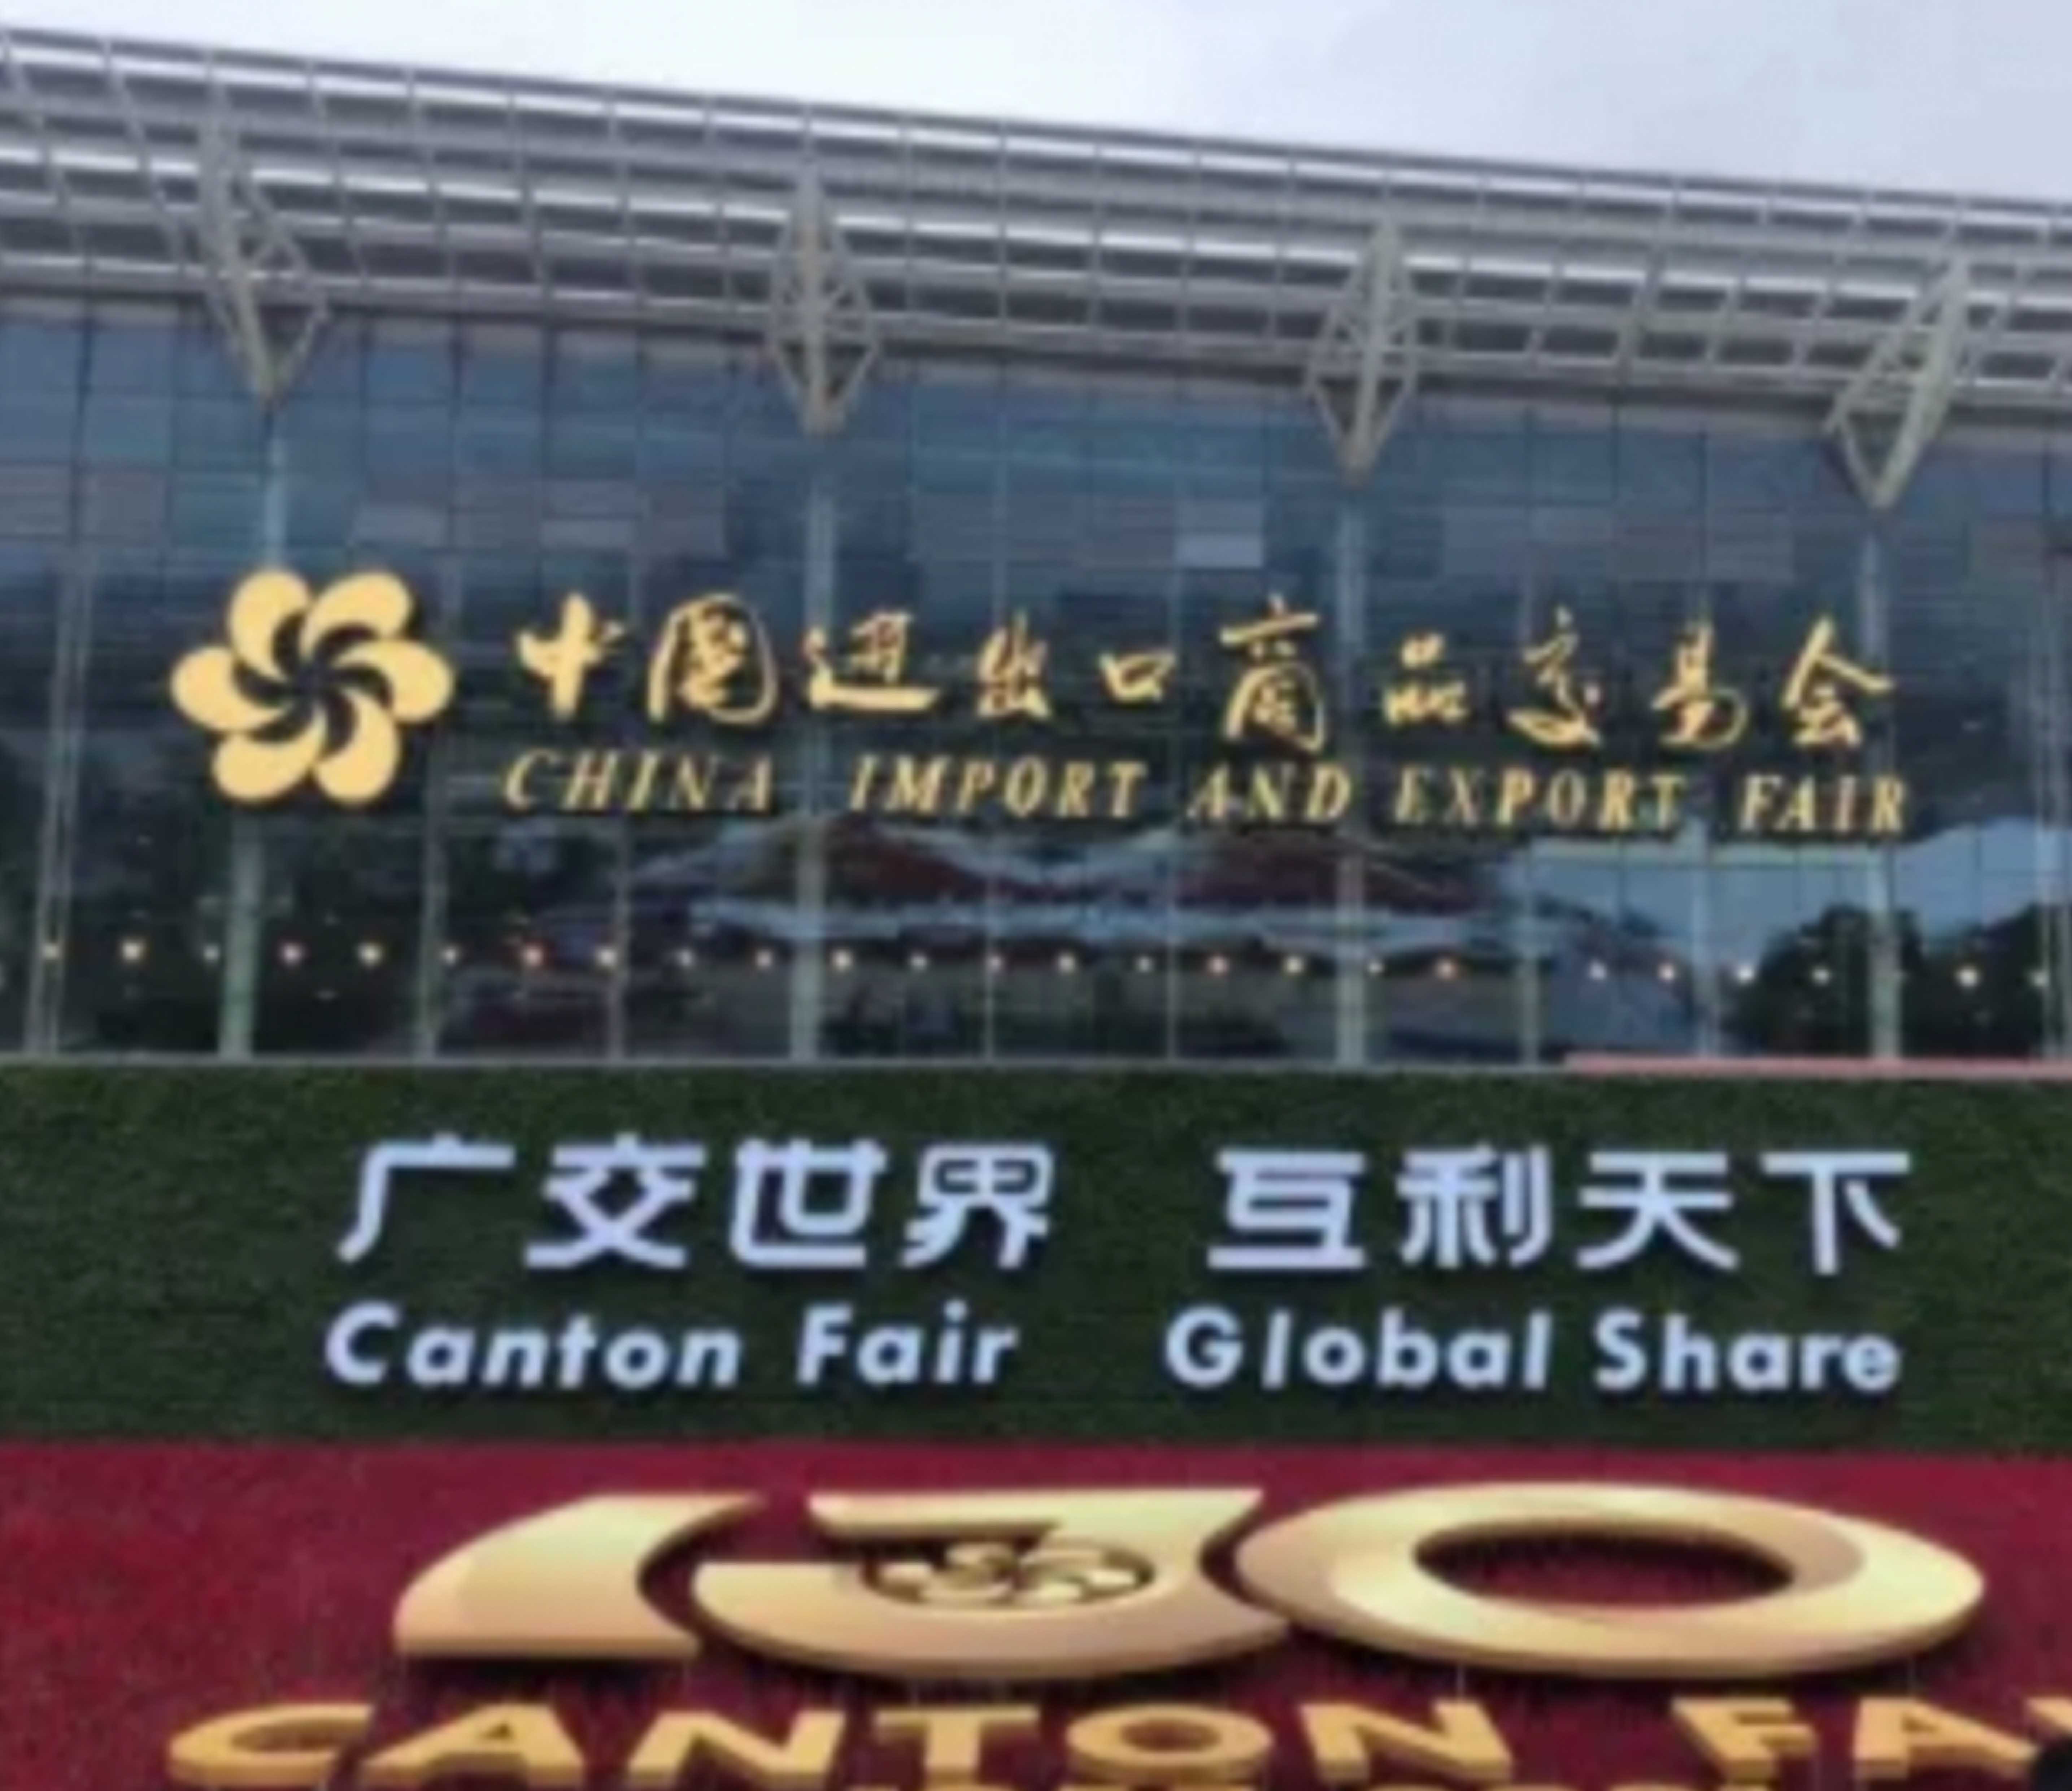 We will attend the 133th Canton fair